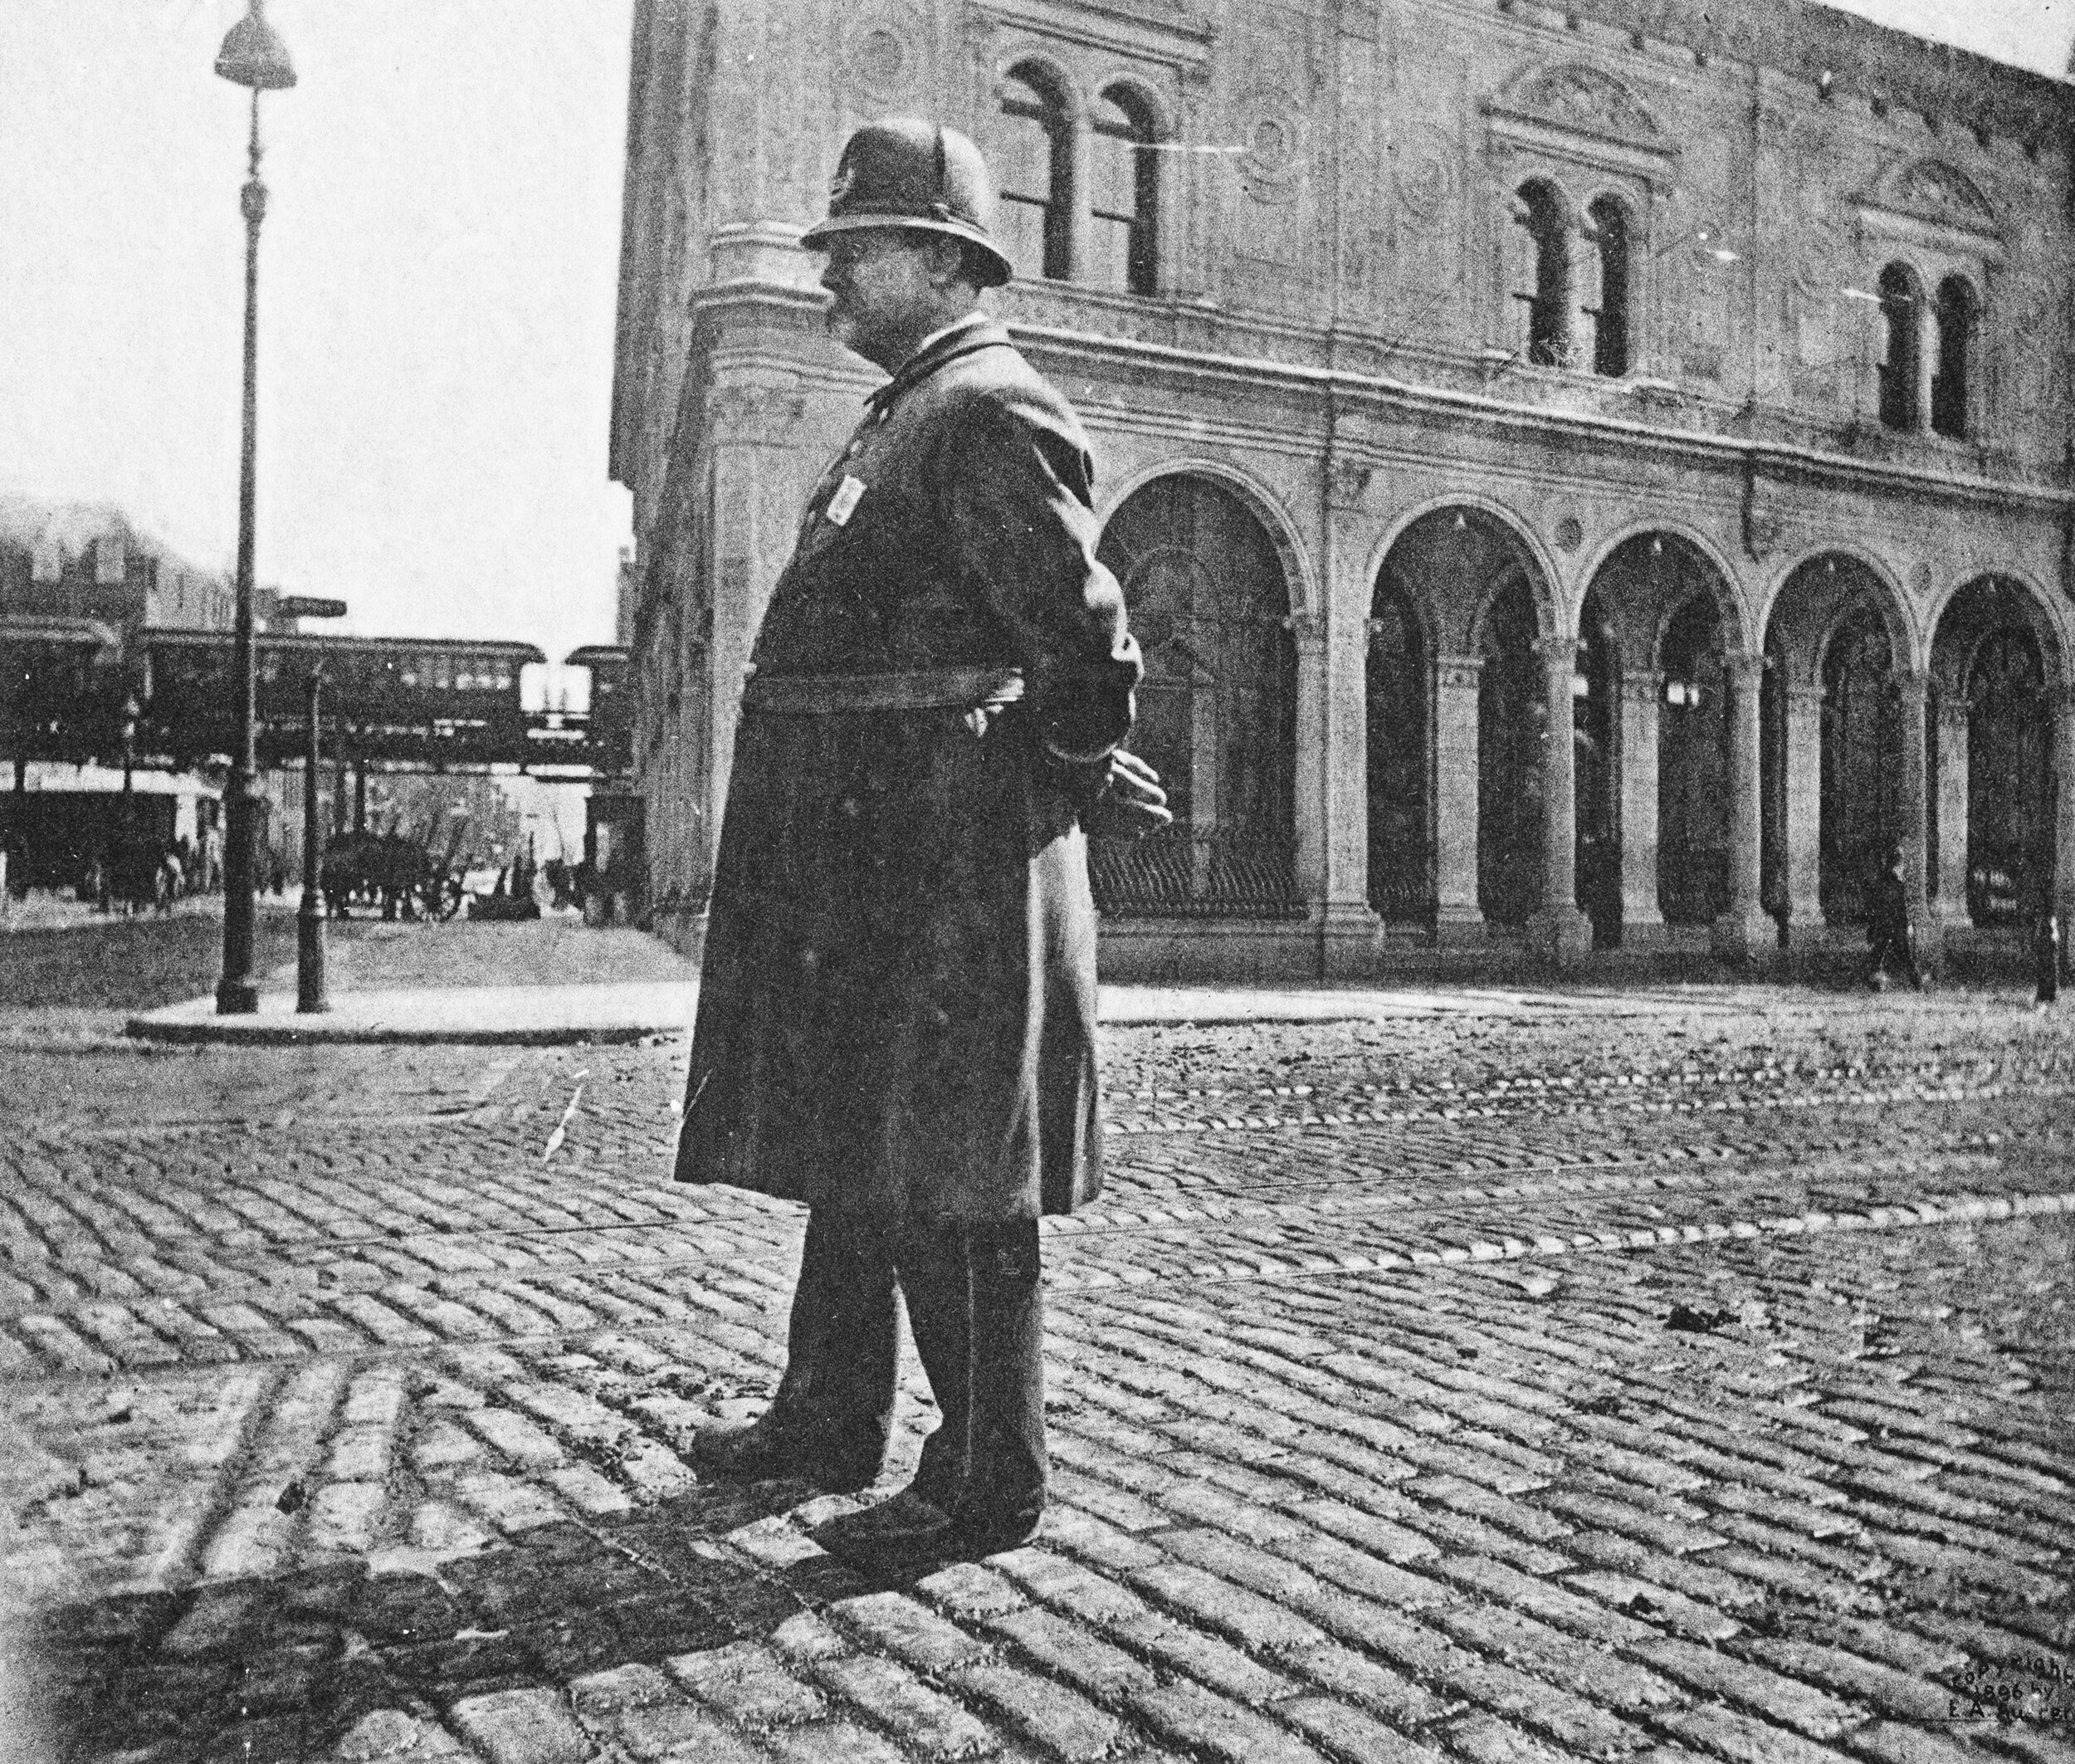   Policeman, Herald Square  Collection of Historic Richmond Town, 50.015.2173 